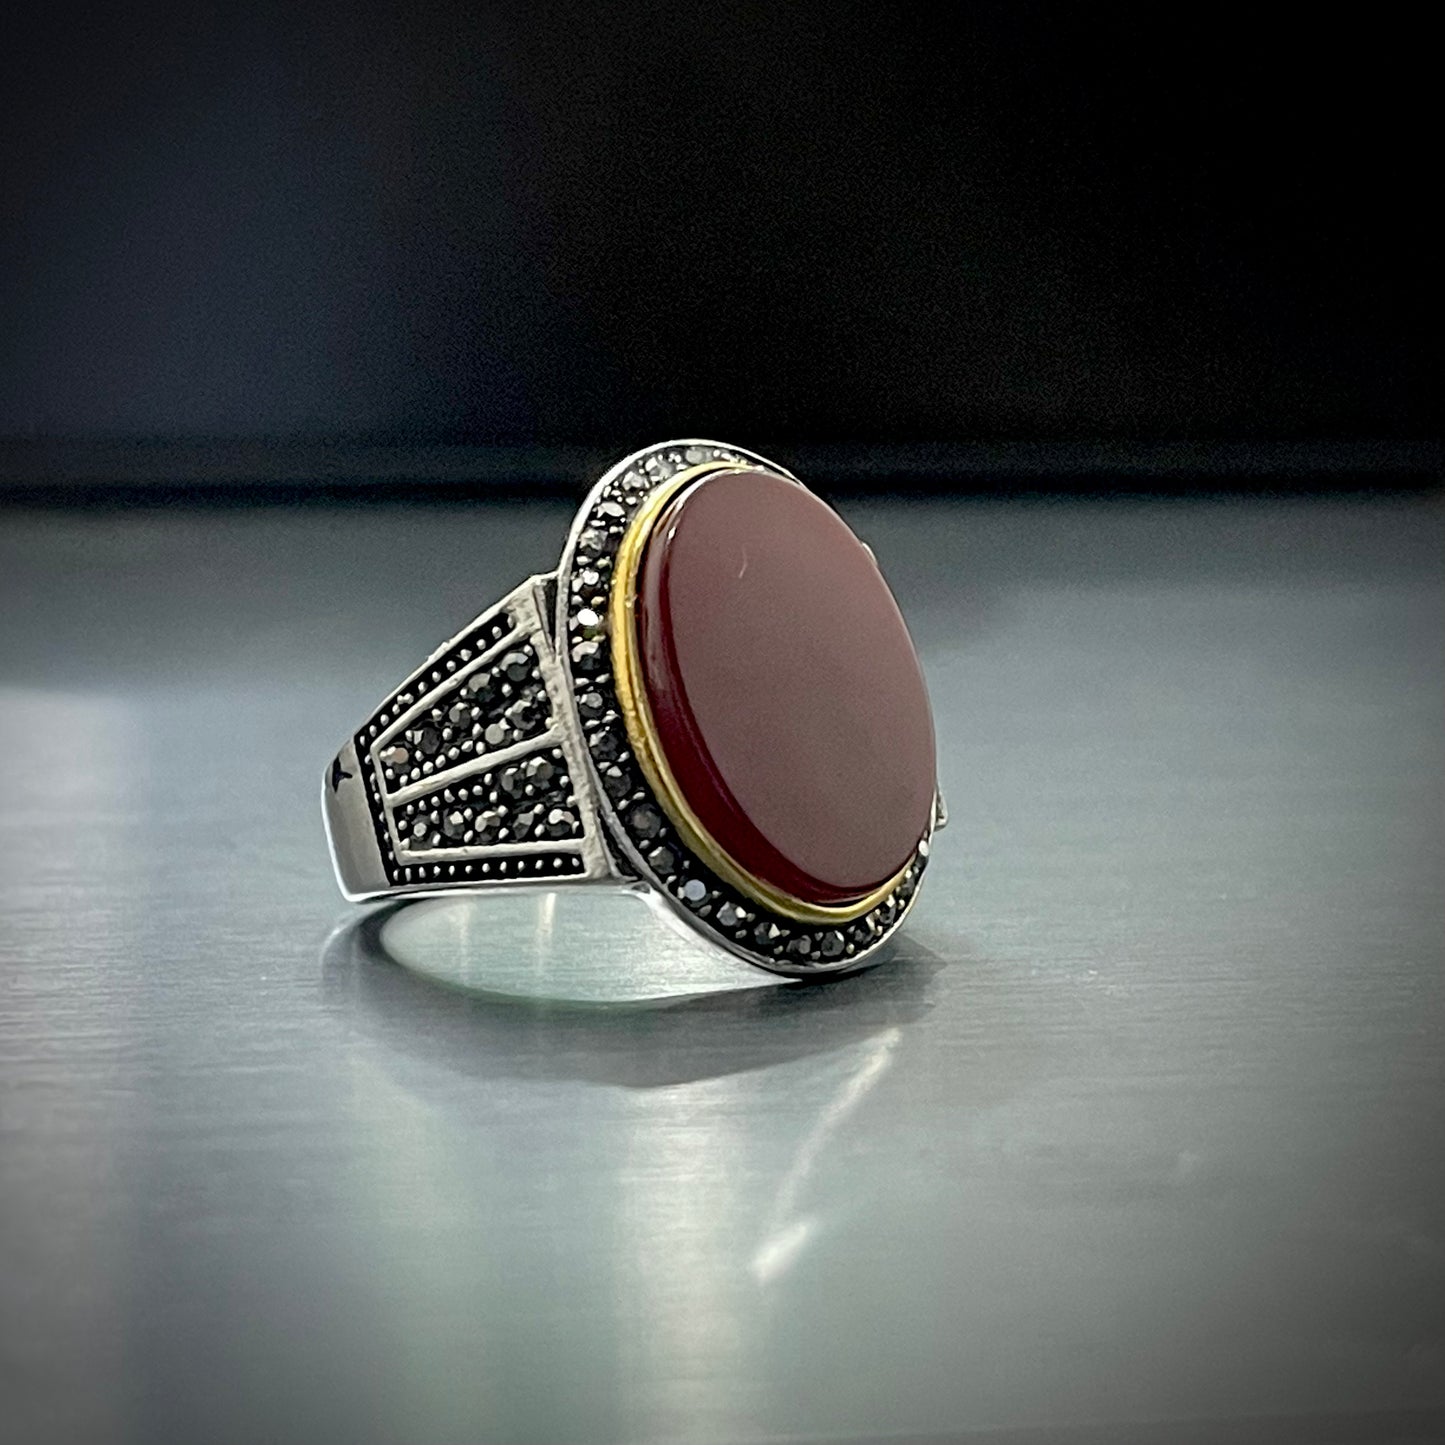 Red Oval Stone Turkish Ring For Men